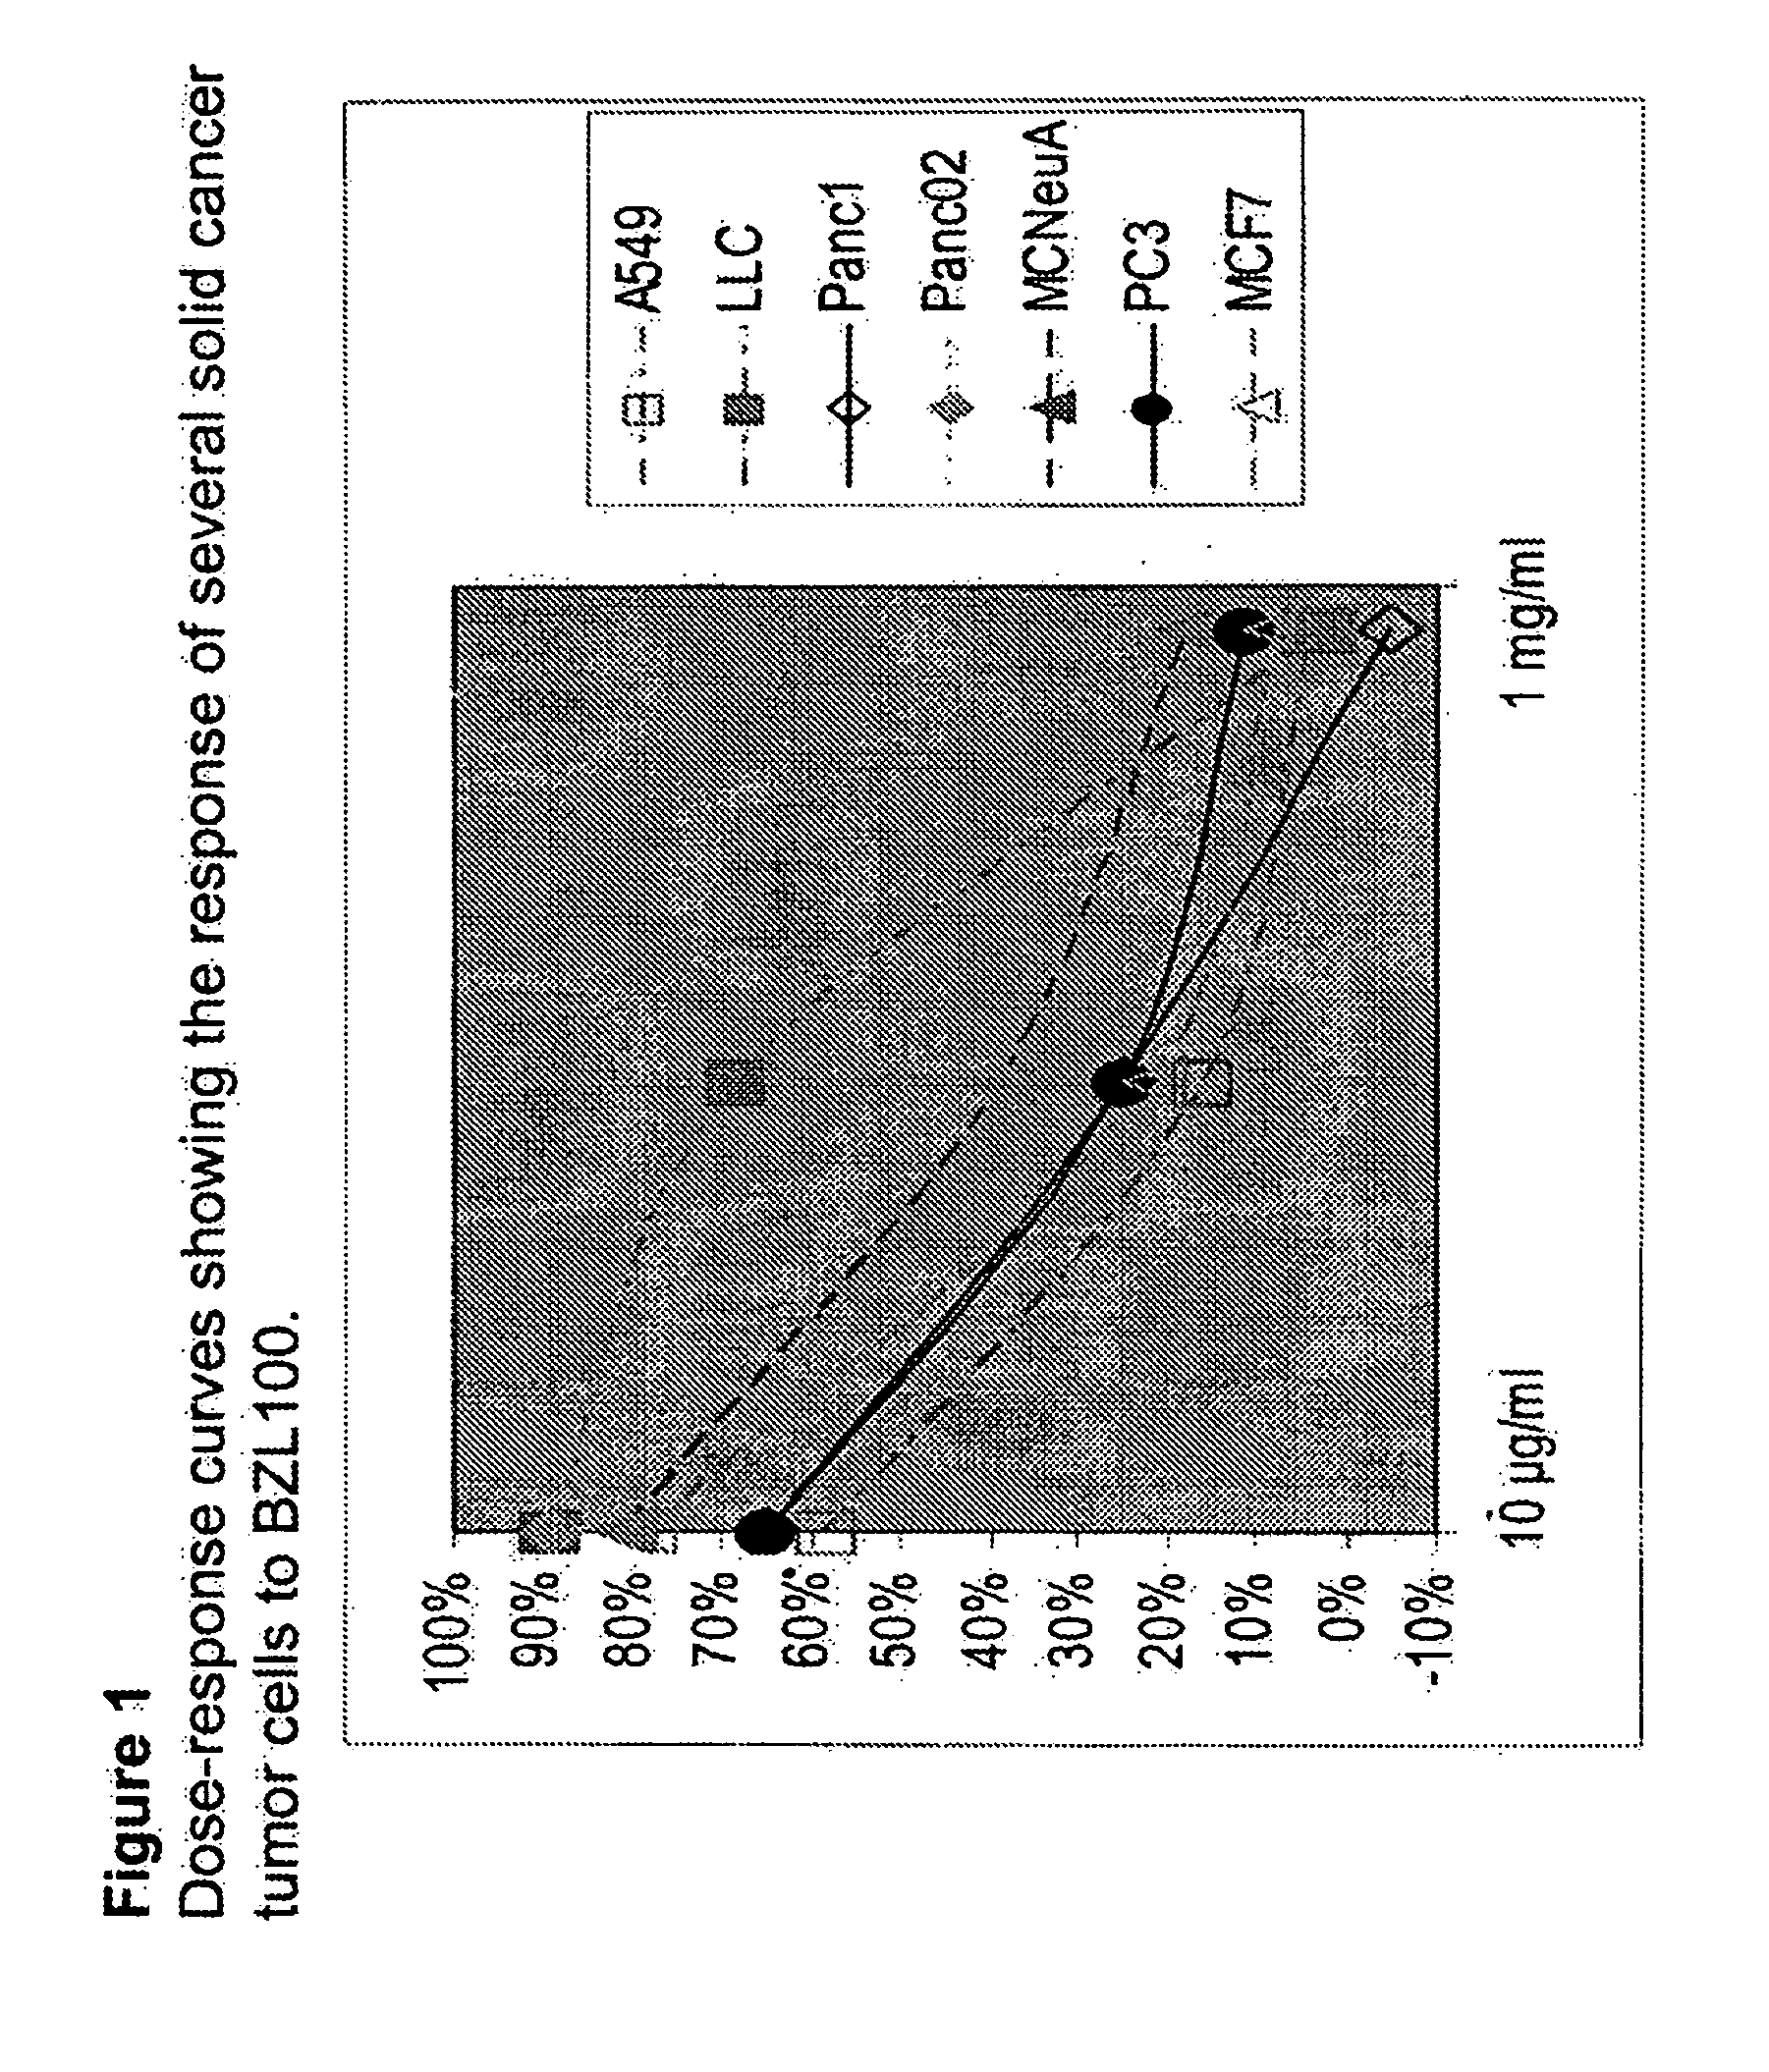 Methods of detecting and treatment of cancers using scutellaria barbata extract